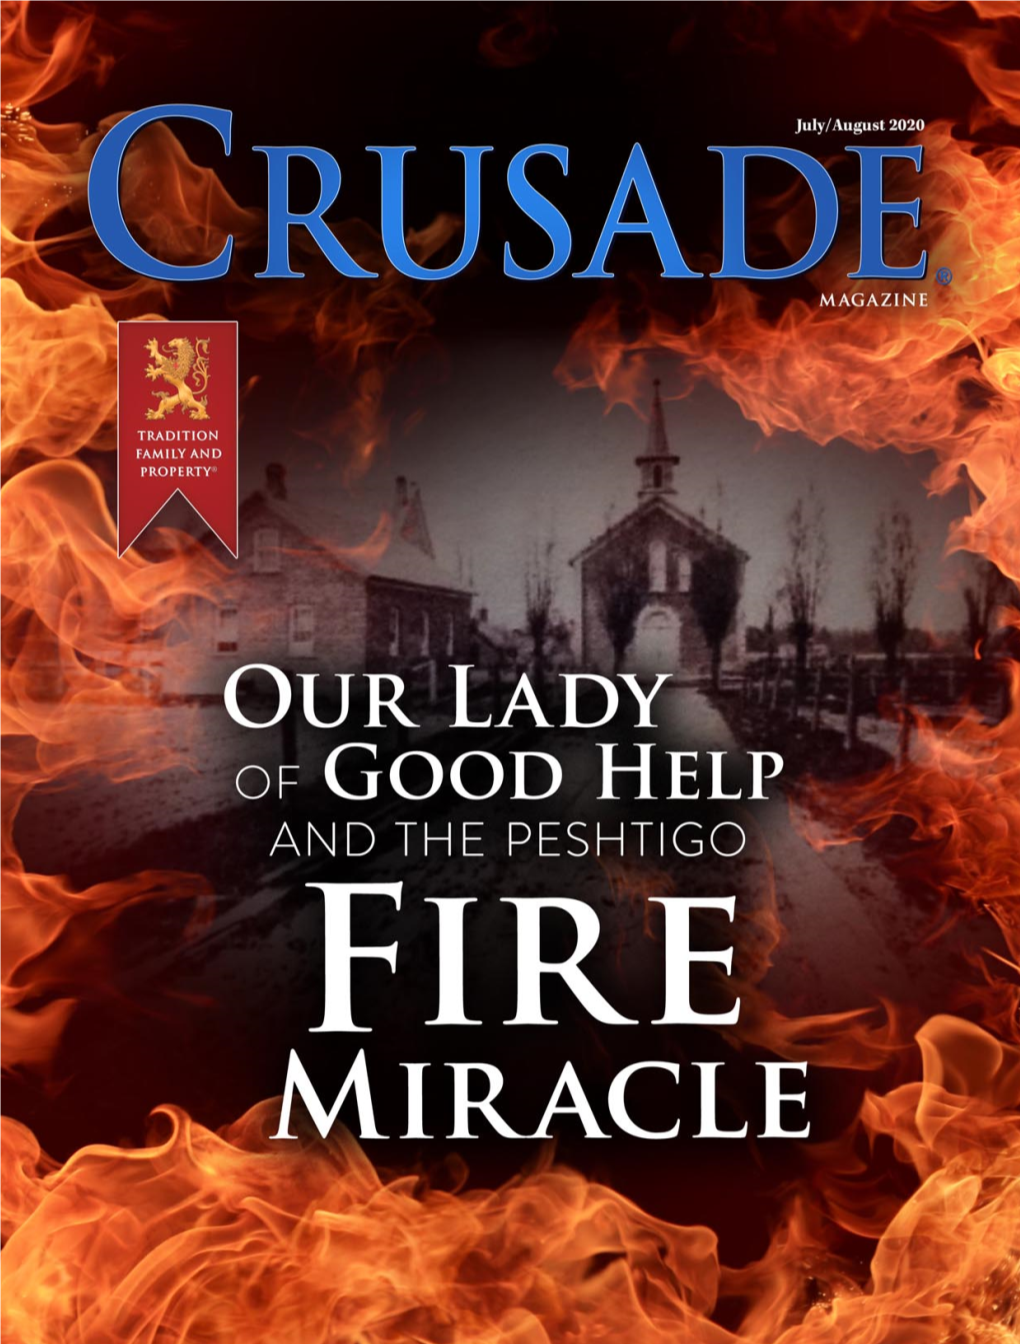 Crusade Magazine Is a Publication of the American Society for the Defense of Tradition, Family and Property (TFP)